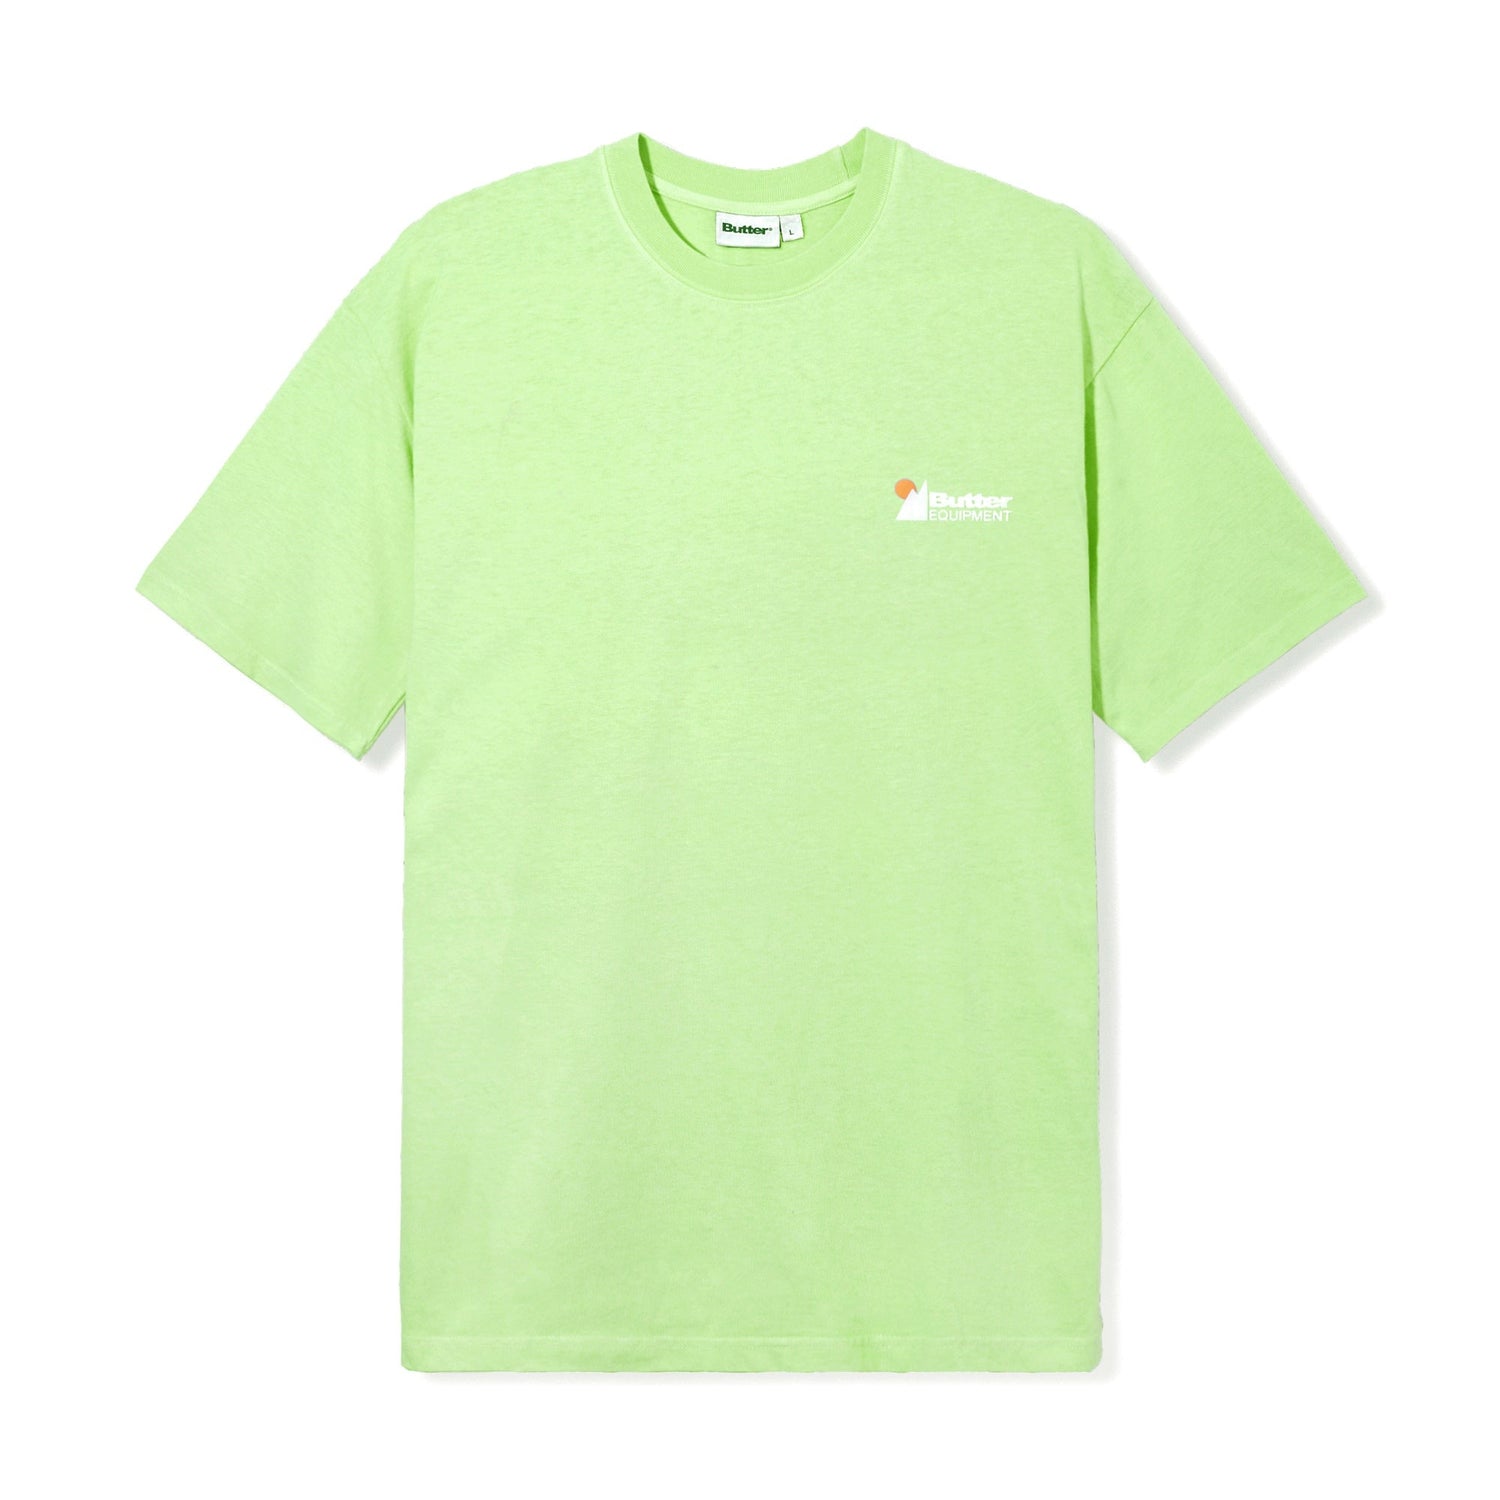 Heavy Weight Pigment Dye Tee, Washed Pistachio